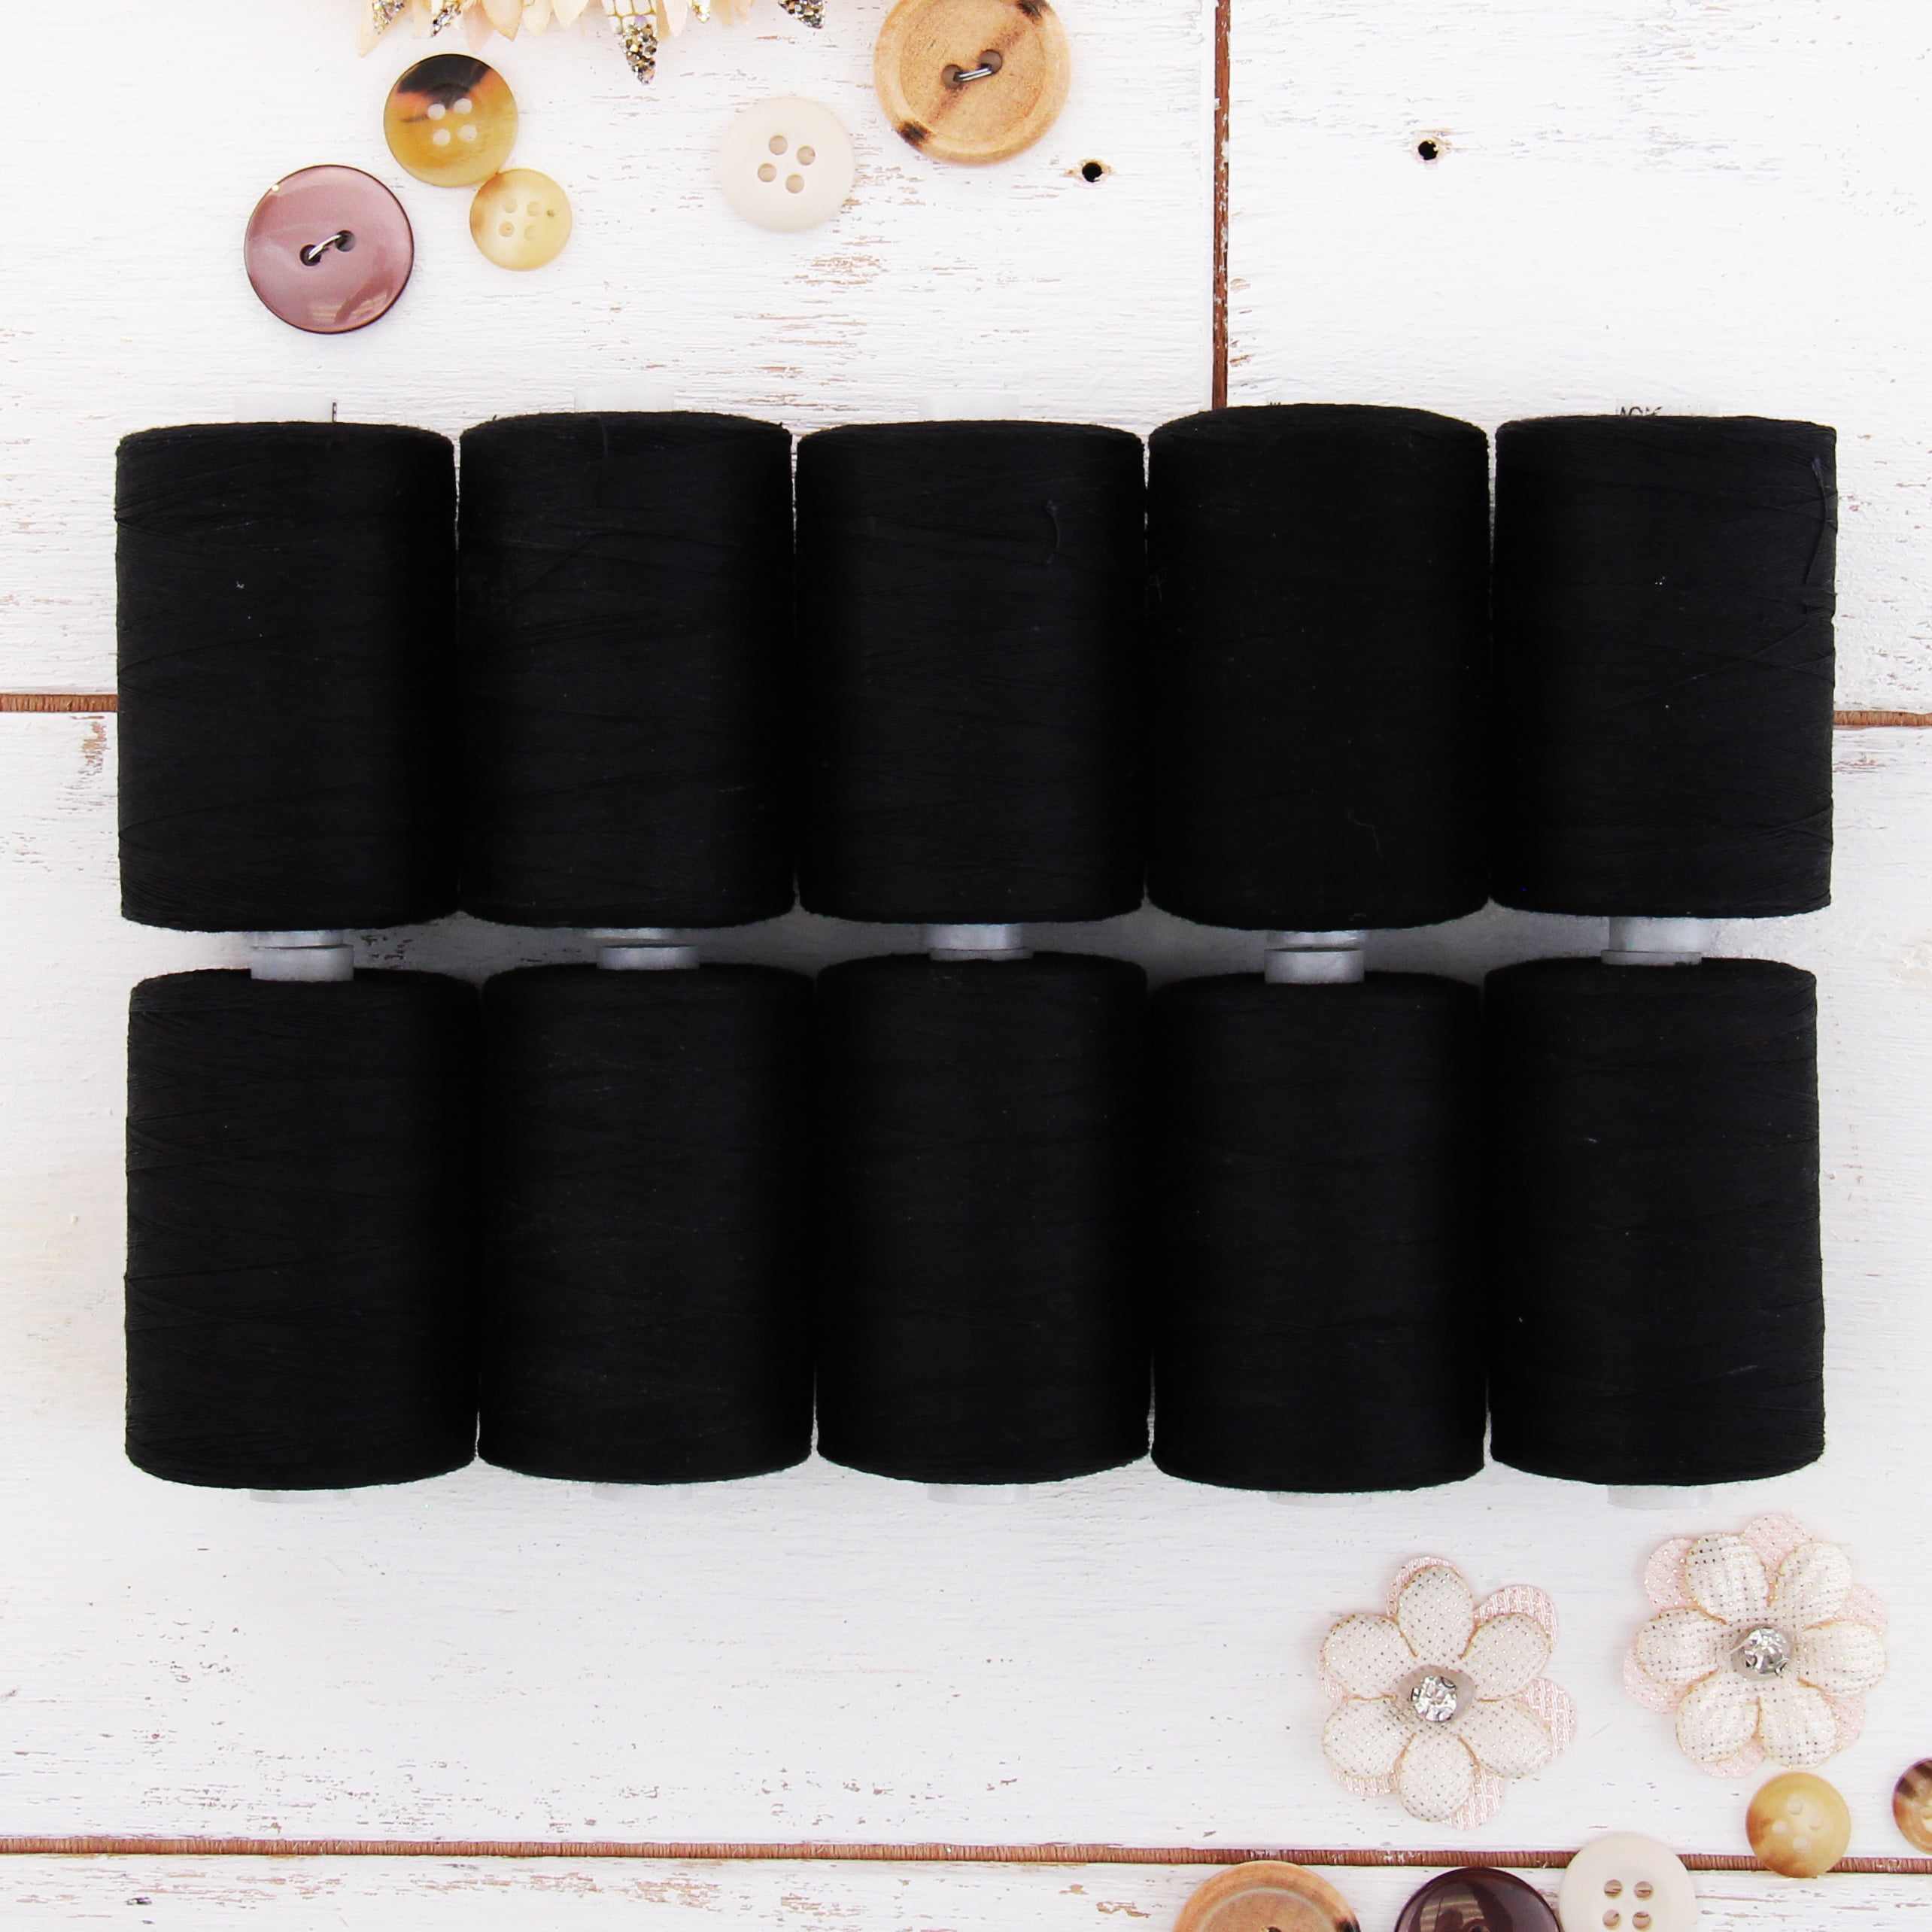 10 Beige Spools Long Staple & Low Lint Spools 1100 Yards Over 20 Other Sets Available Threadart 100% Cotton Thread Set For Quilting & Sewing 50/3 Weight 1000M 